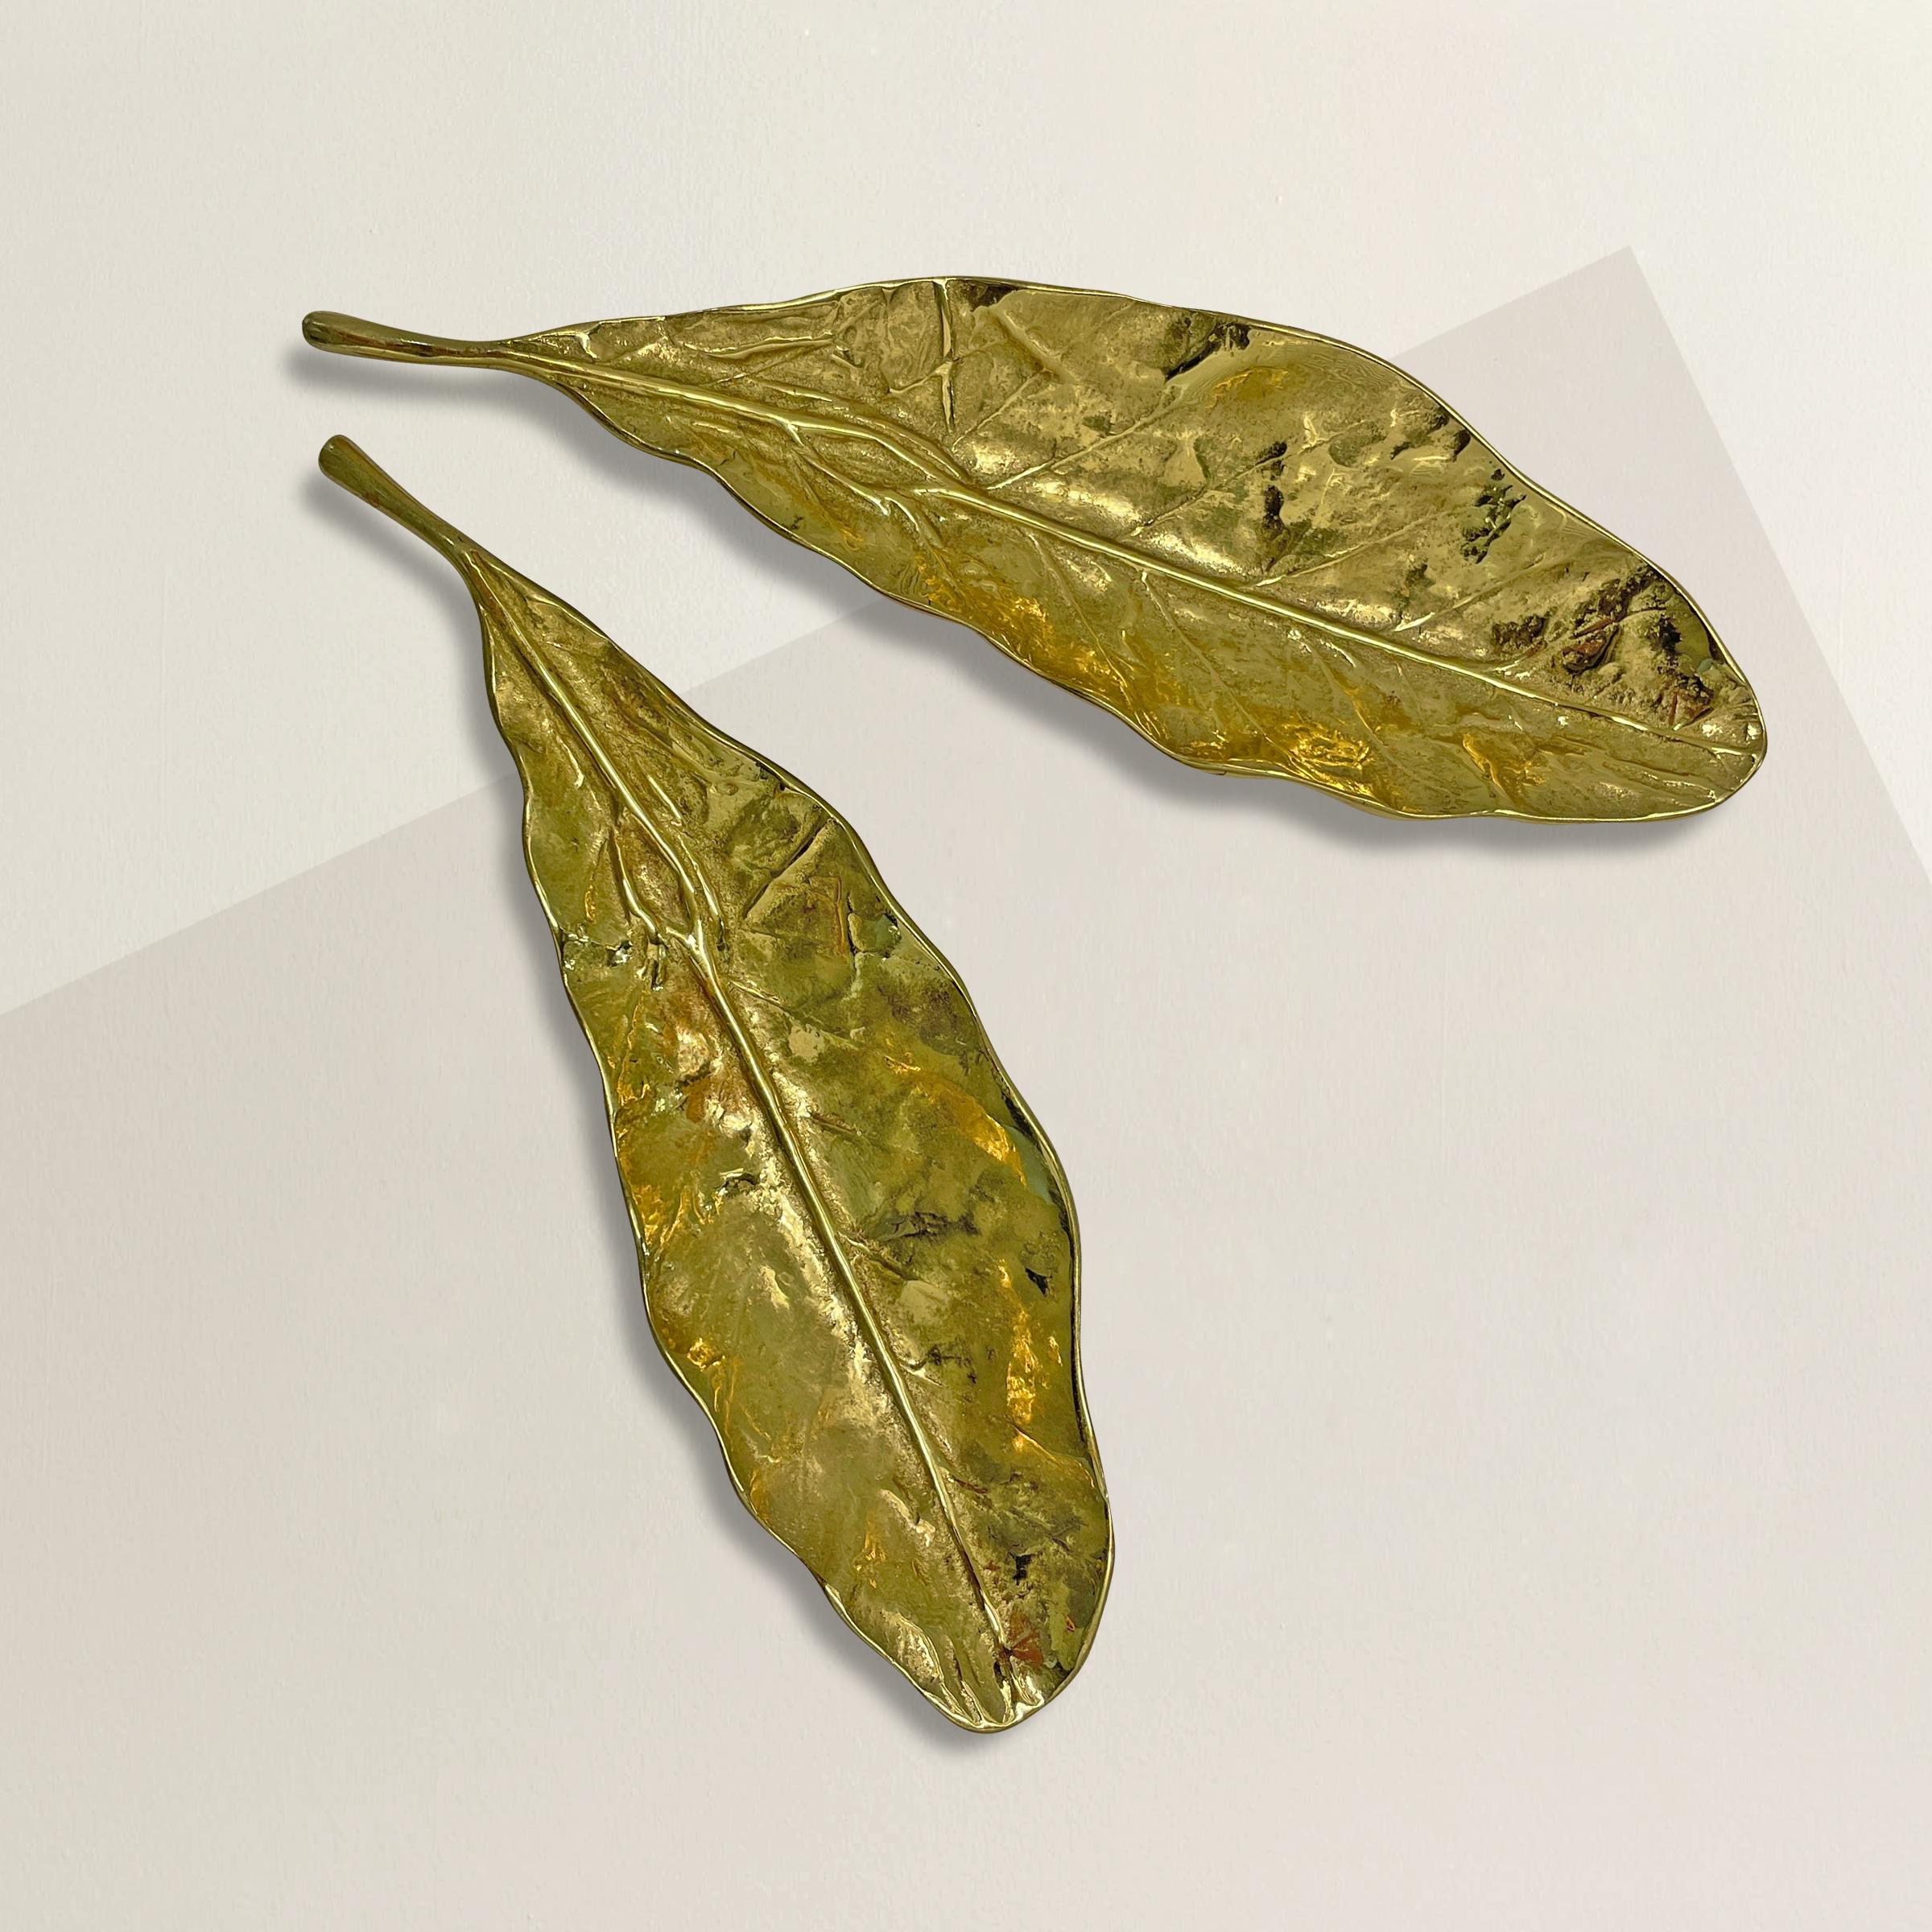 A pair of chic vintage American solid cast brass tobacco leaf dishes, perfect for holding paperclips, pens, chocolates, or any other vices you may have.